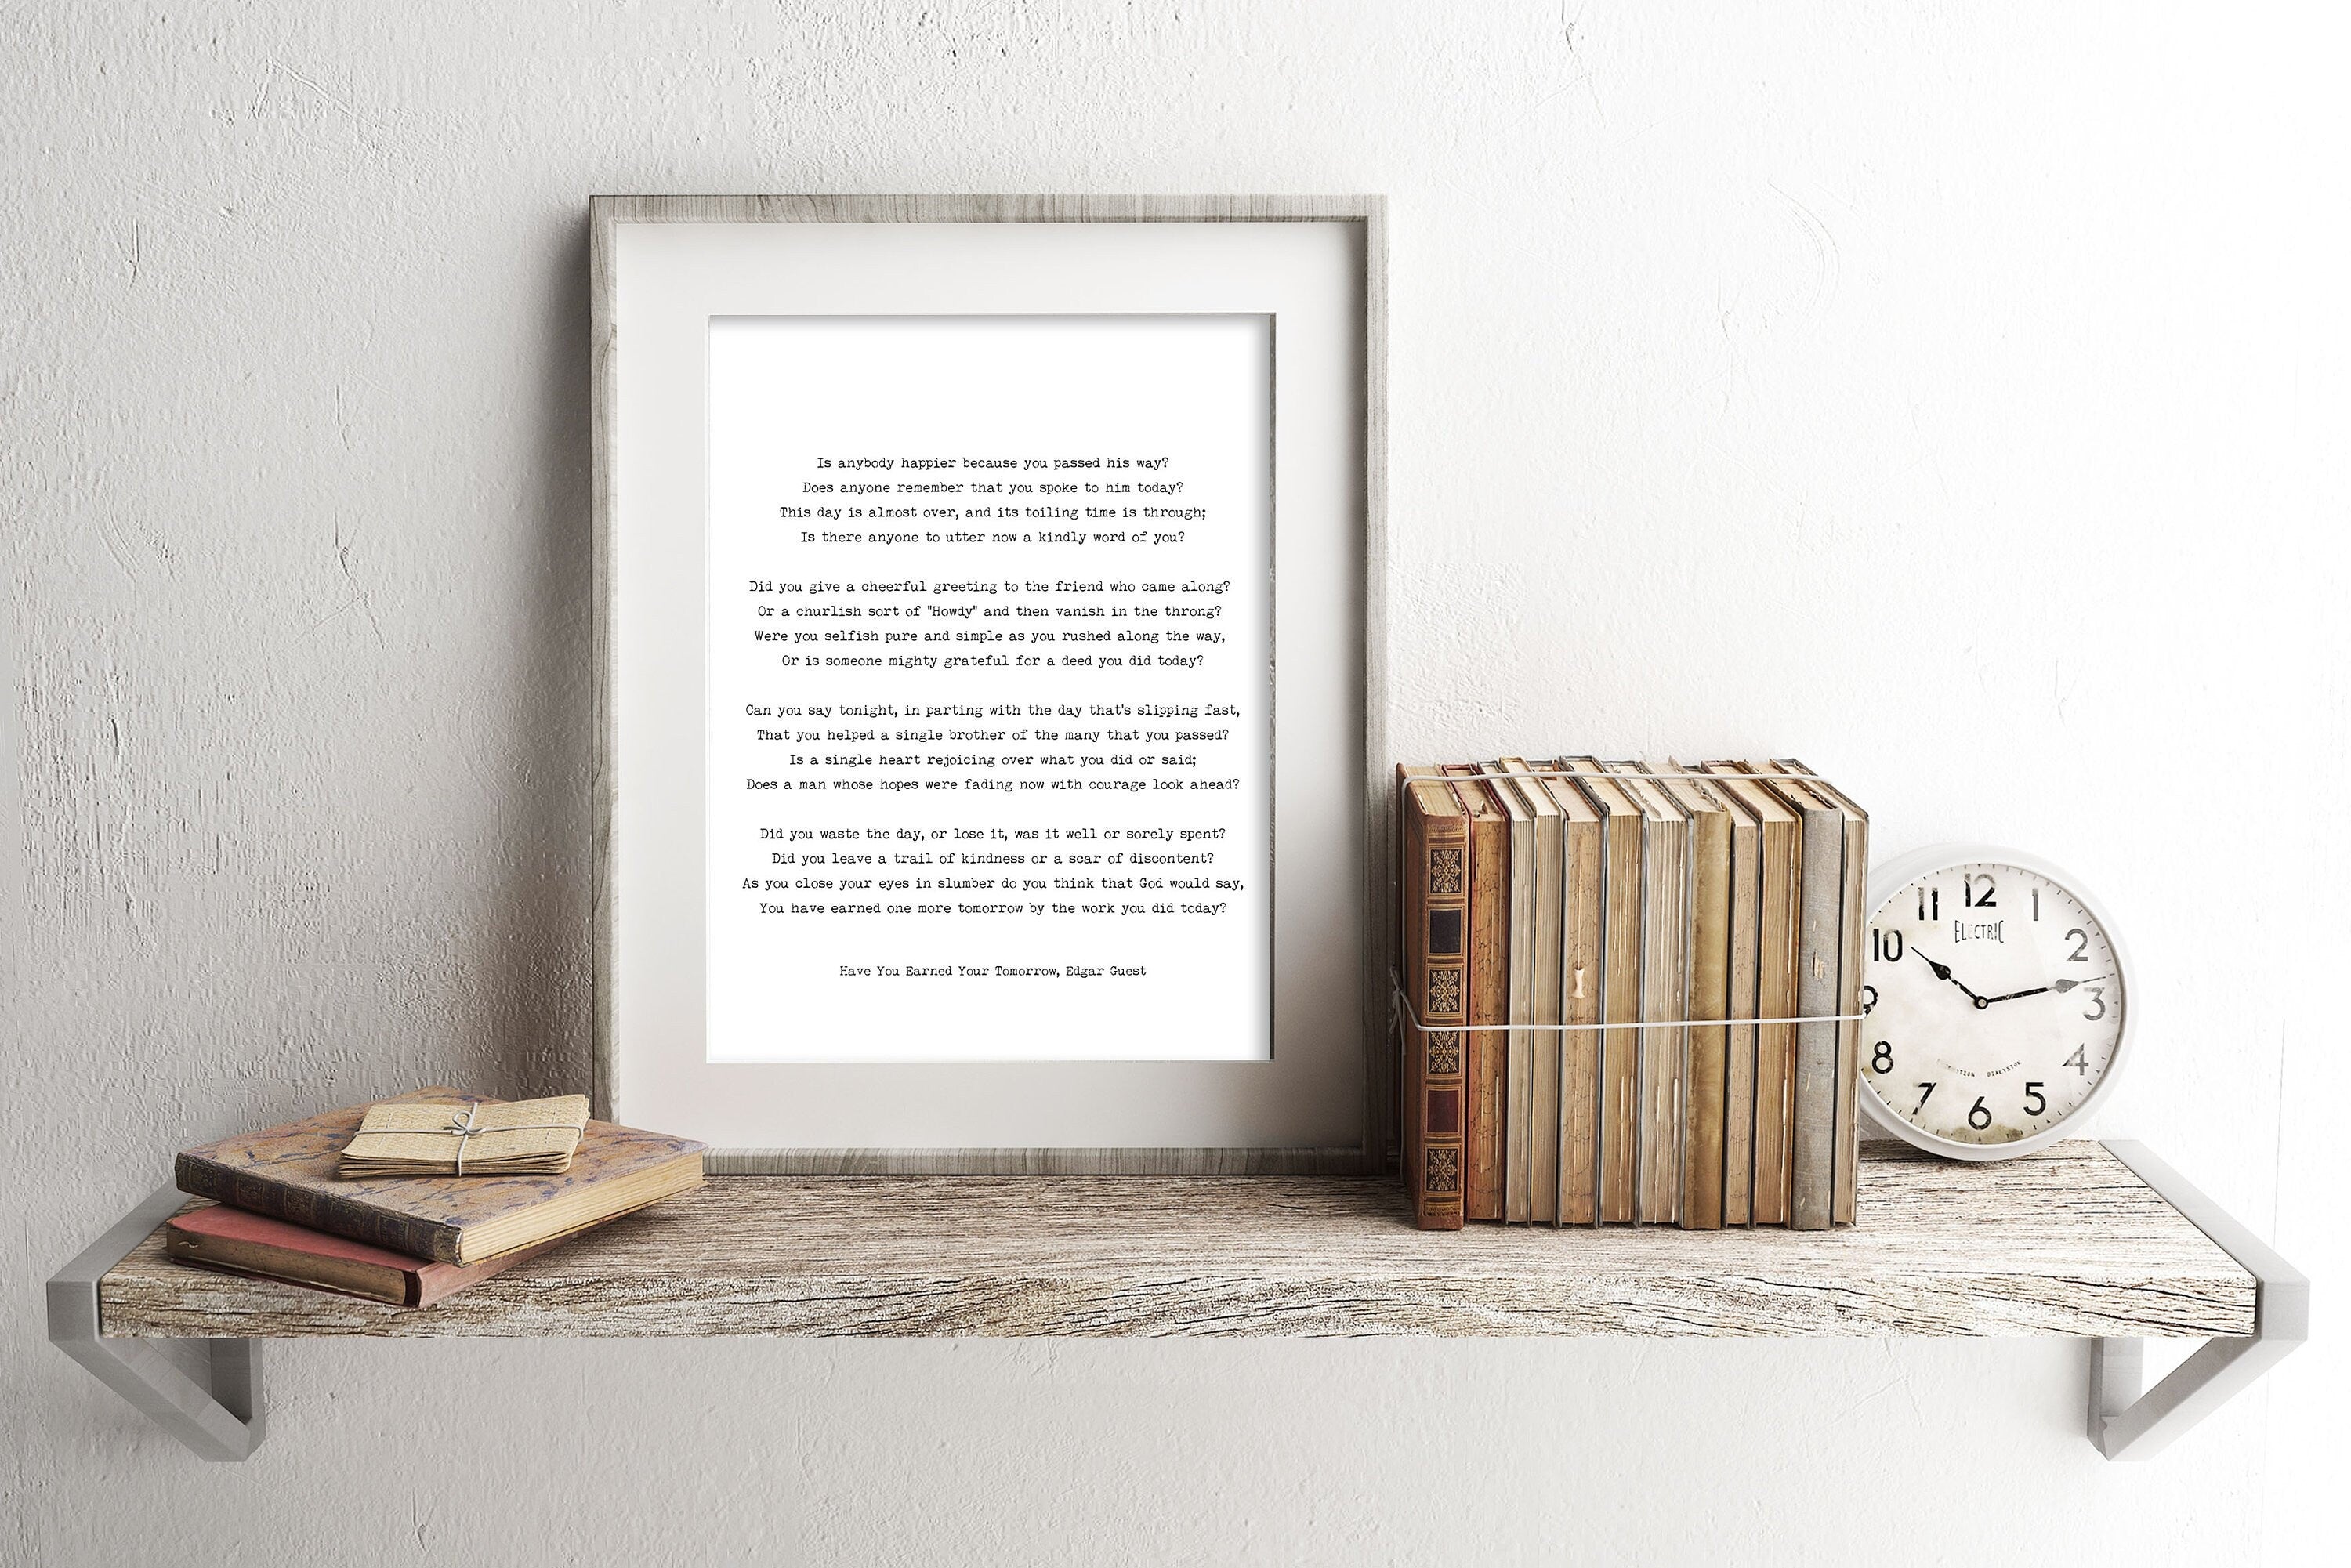 Have You Earned Your Tomorrow Edgar Guest Poem, Unframed Black & White Poetry Wall Art Prints